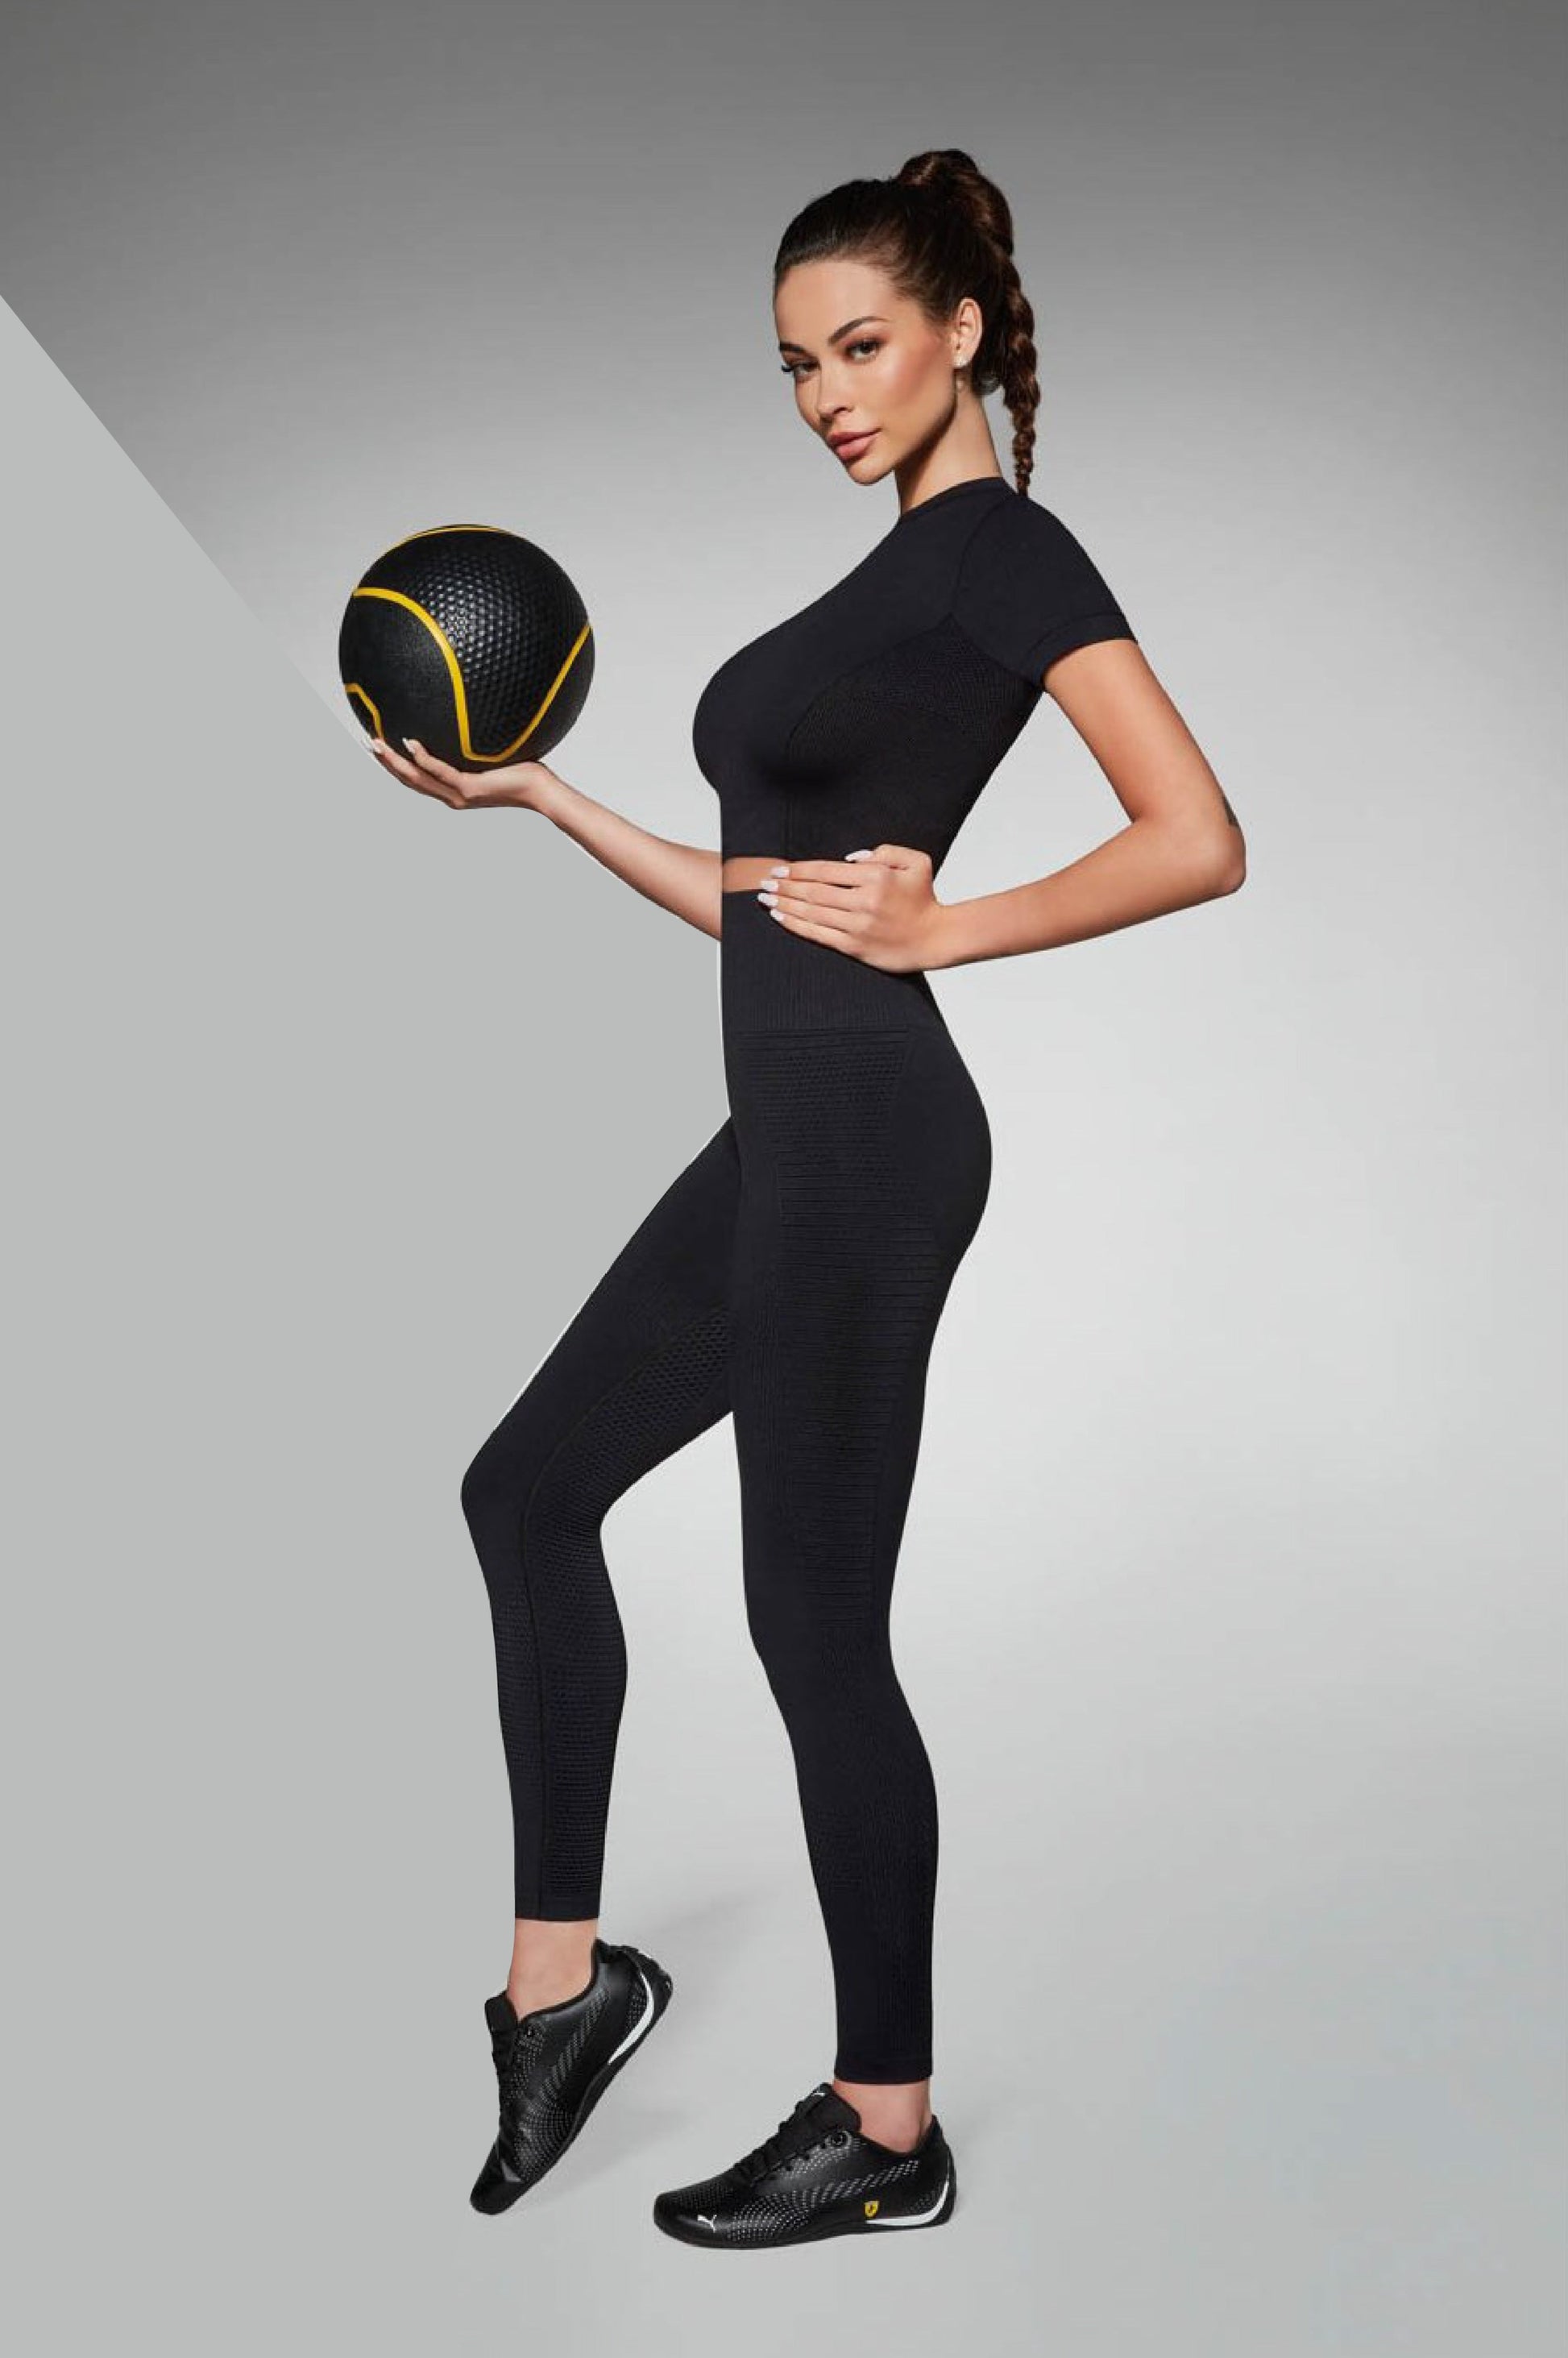 BasBlack Challenge Leggings - Black seamless sports leggings with different textured panelling to shape the legs and bum, extra deep elasticated waistband and gusset with flat seams.